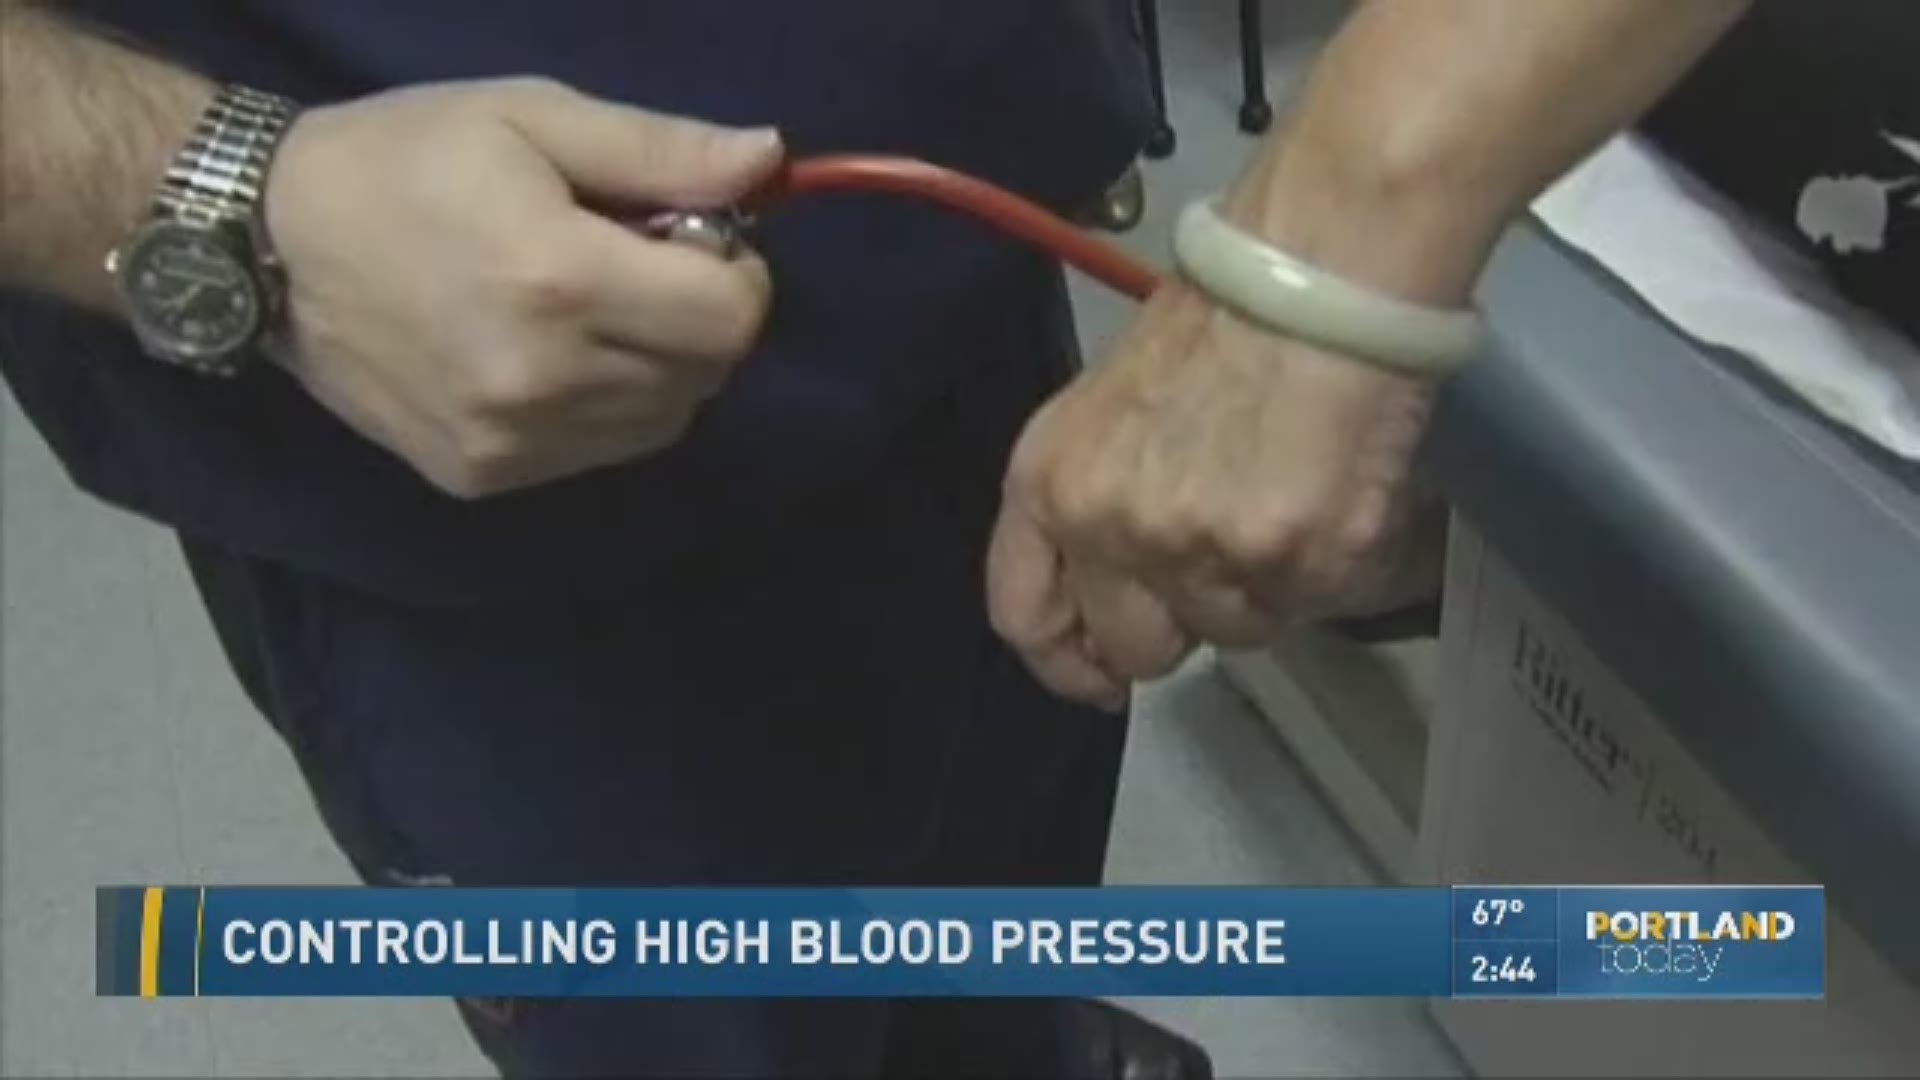 Kaiser Permanente Cardiologist Dr. Katherine Strelich discusses the new American Heart Association blood pressure guidelines, which have changed from 140 over 90 to 130 over 80.